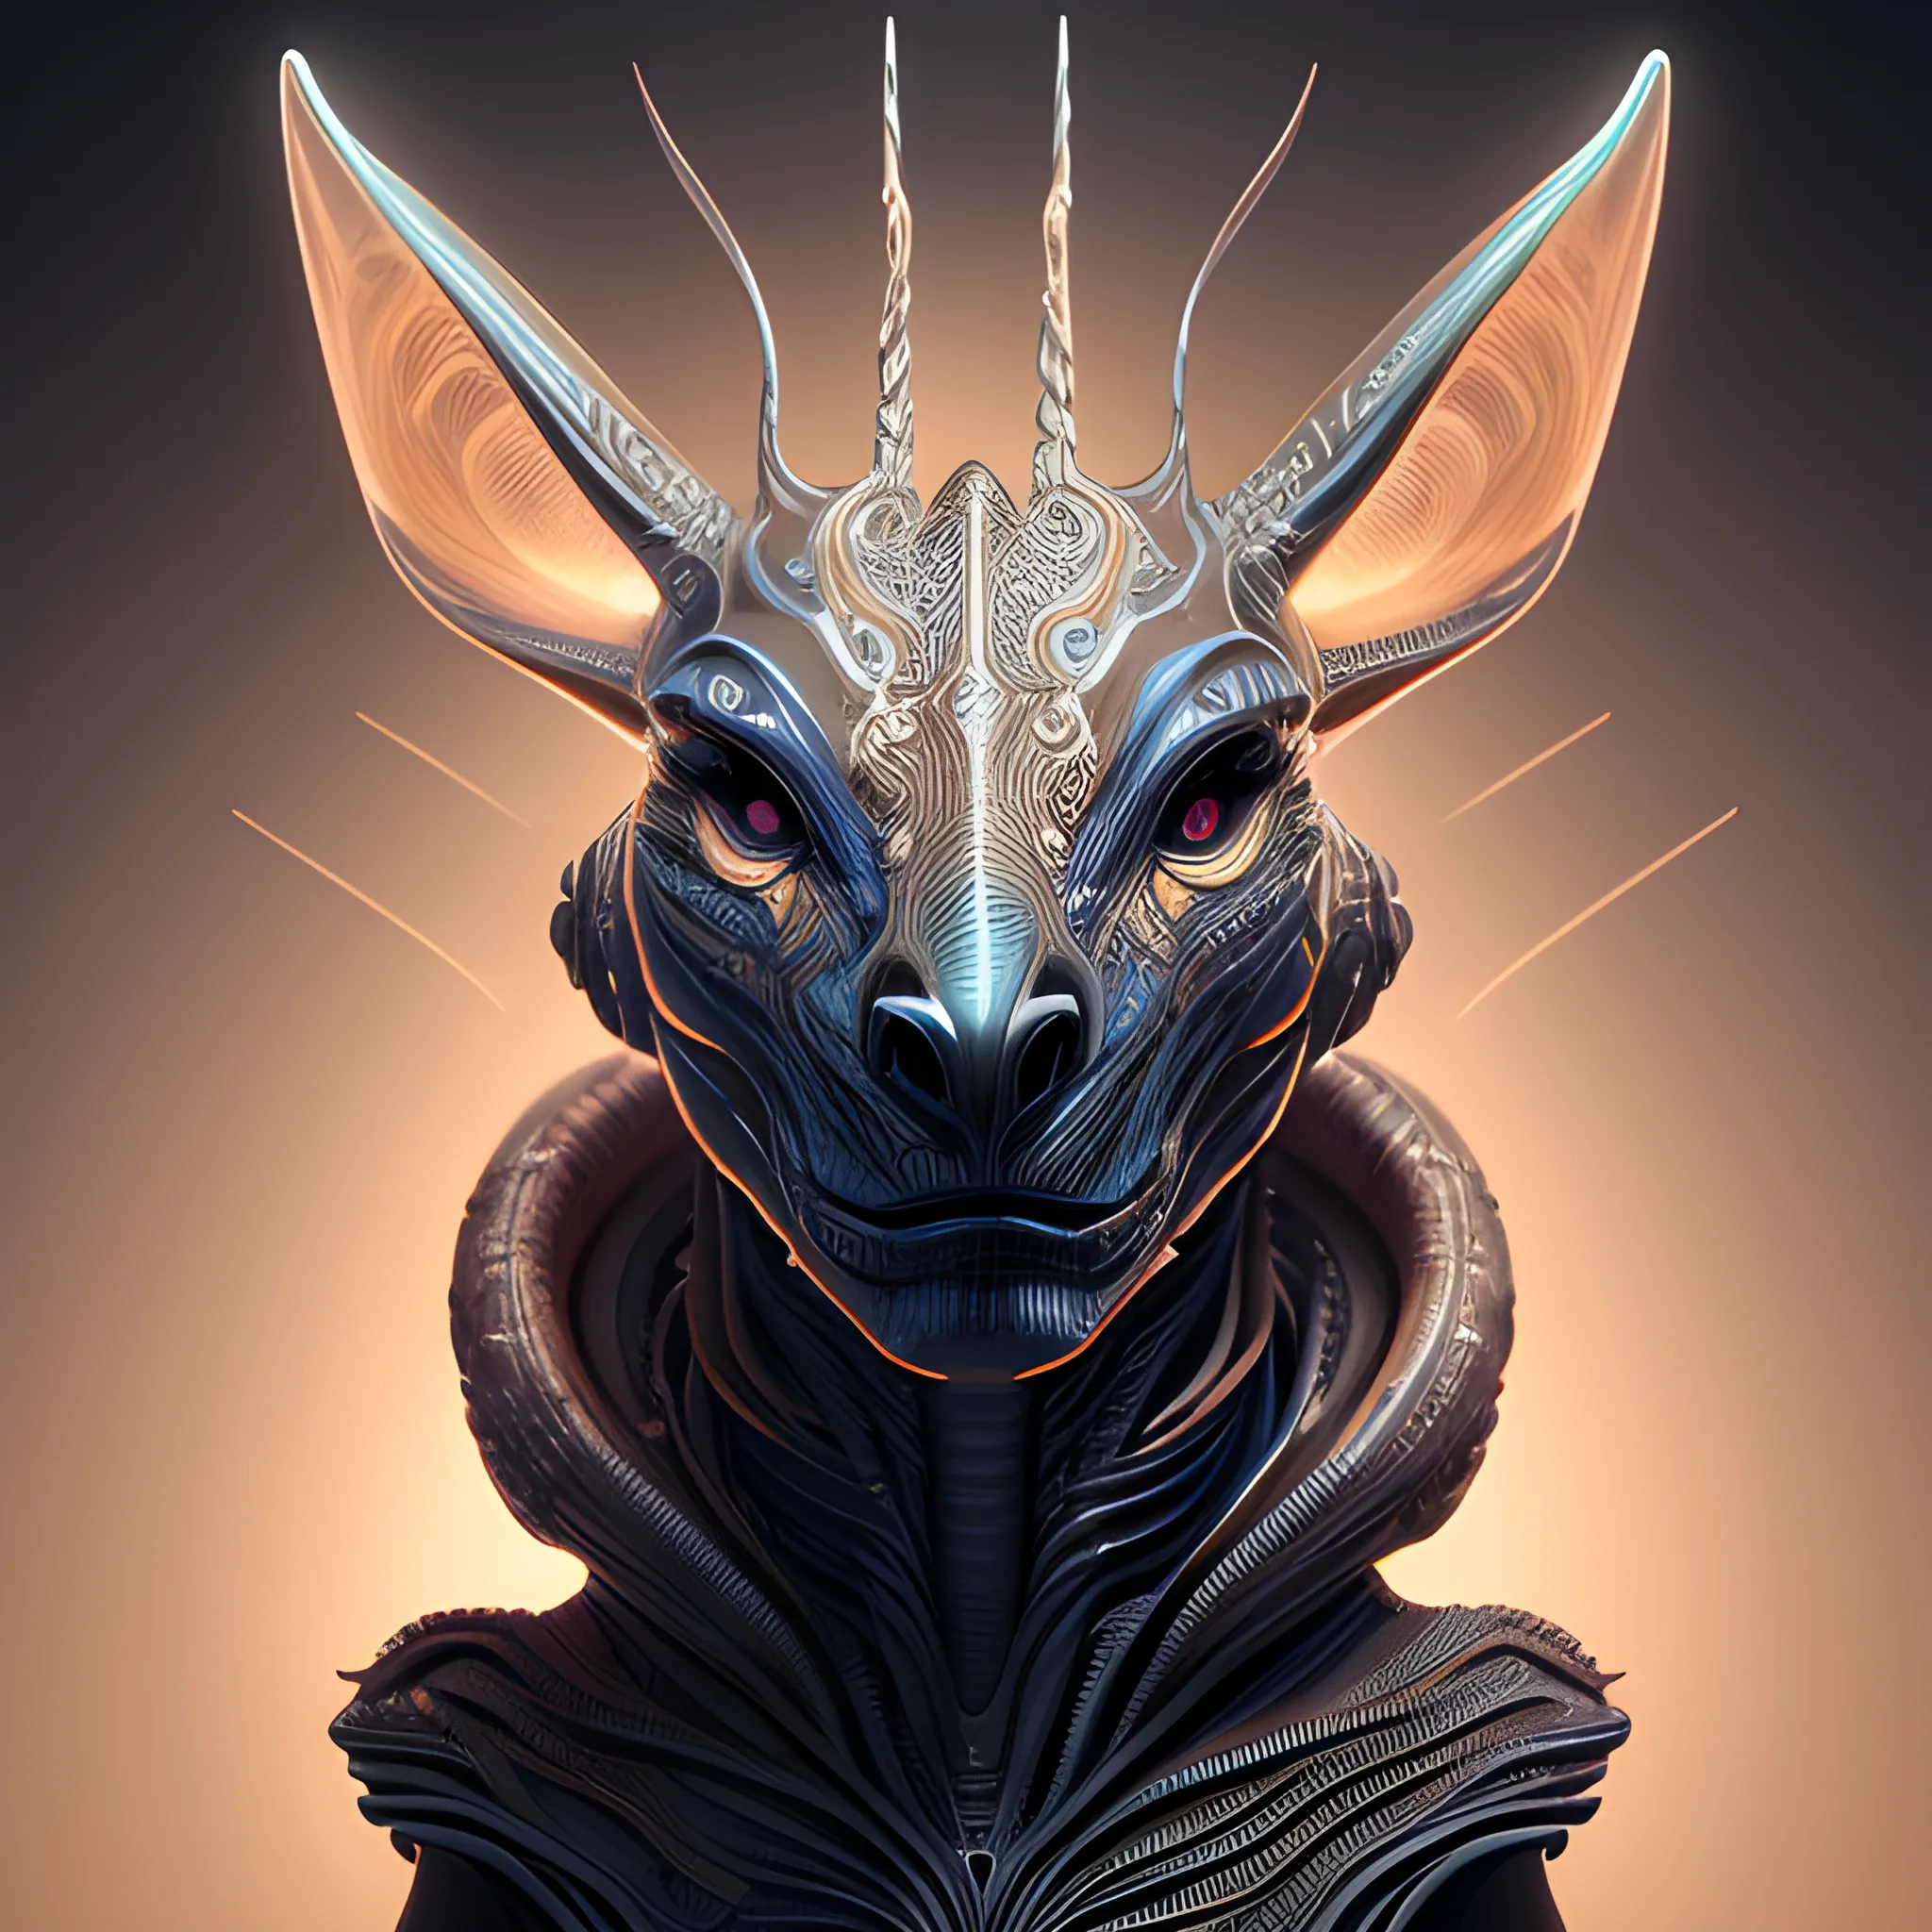 A detailed and intricate digital art piece in a cinematic style, this ultra high resolution portrait of a powerful alien beast is a true masterpiece. The beautiful lighting and playful design make it a trend-setter on ArtStation. A true award-winning work., 3D, Cartoon